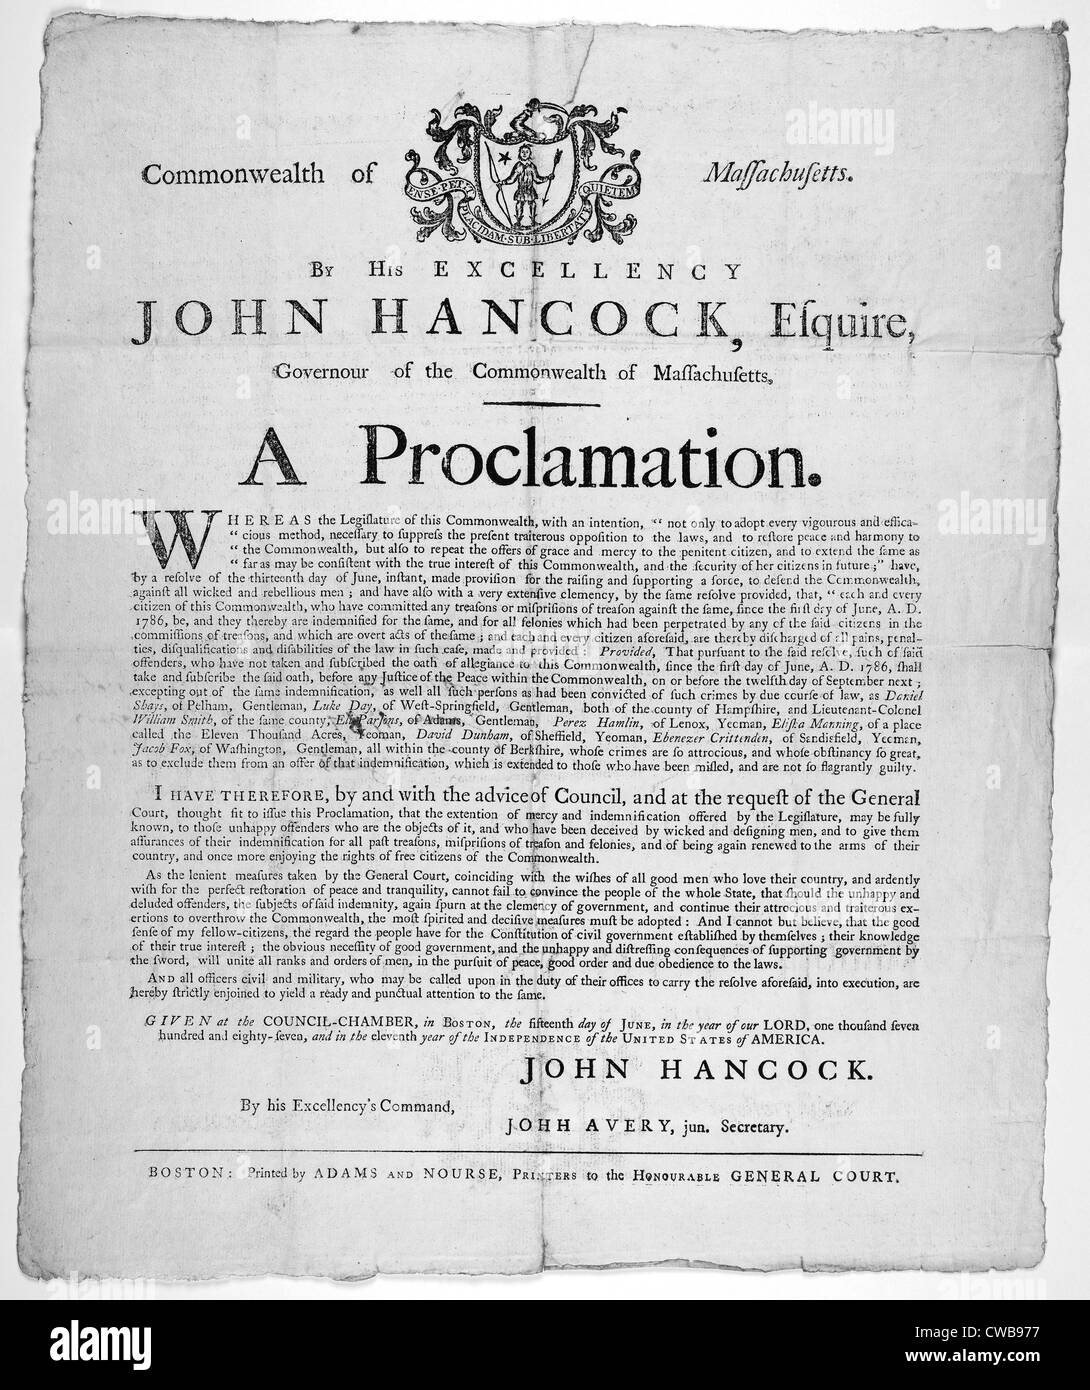 Commonwealth of Massachusetts. By His excellency John Hancock, Esquire Governour of the Commonwealth of Massachusetts. A Stock Photo